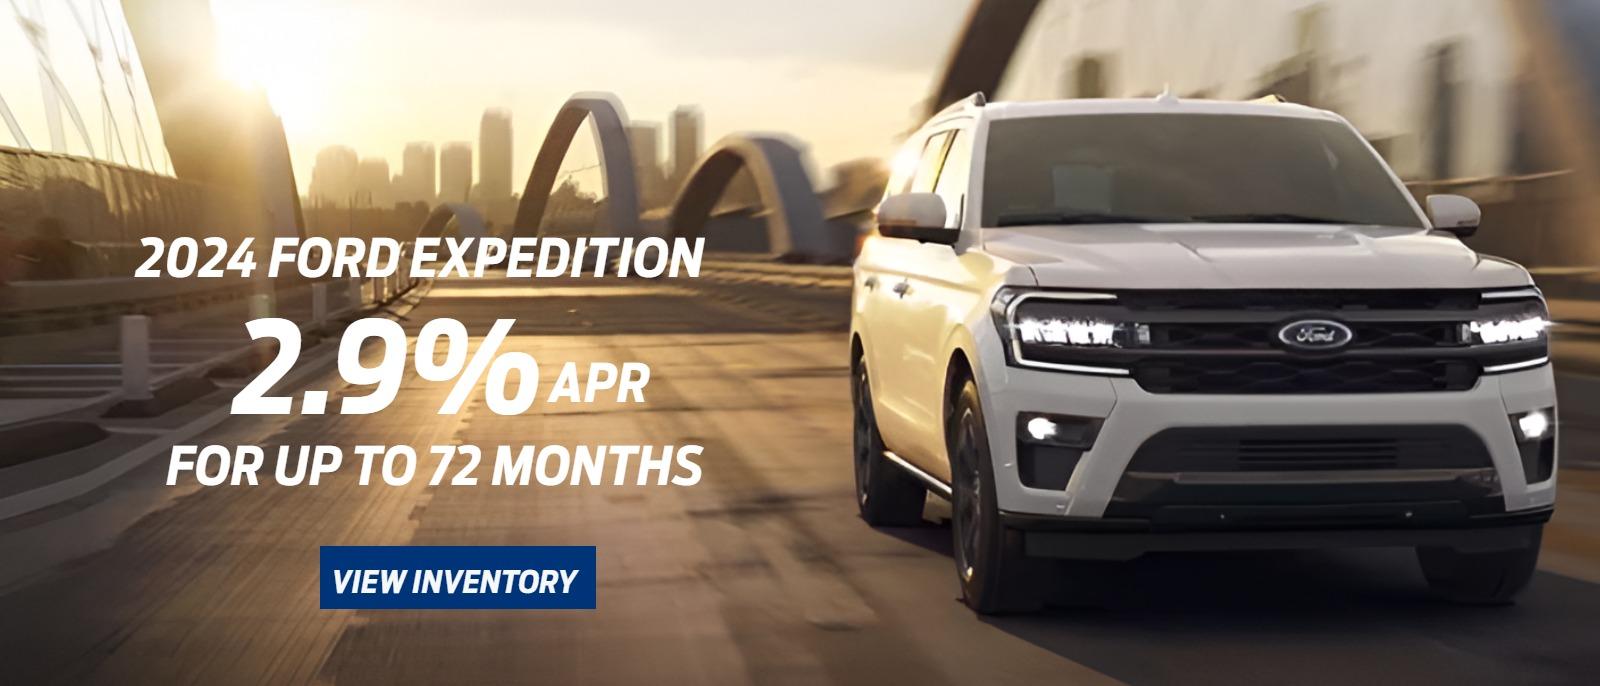 2024 Ford Expedition: 2.9% APR for up to 72 months!